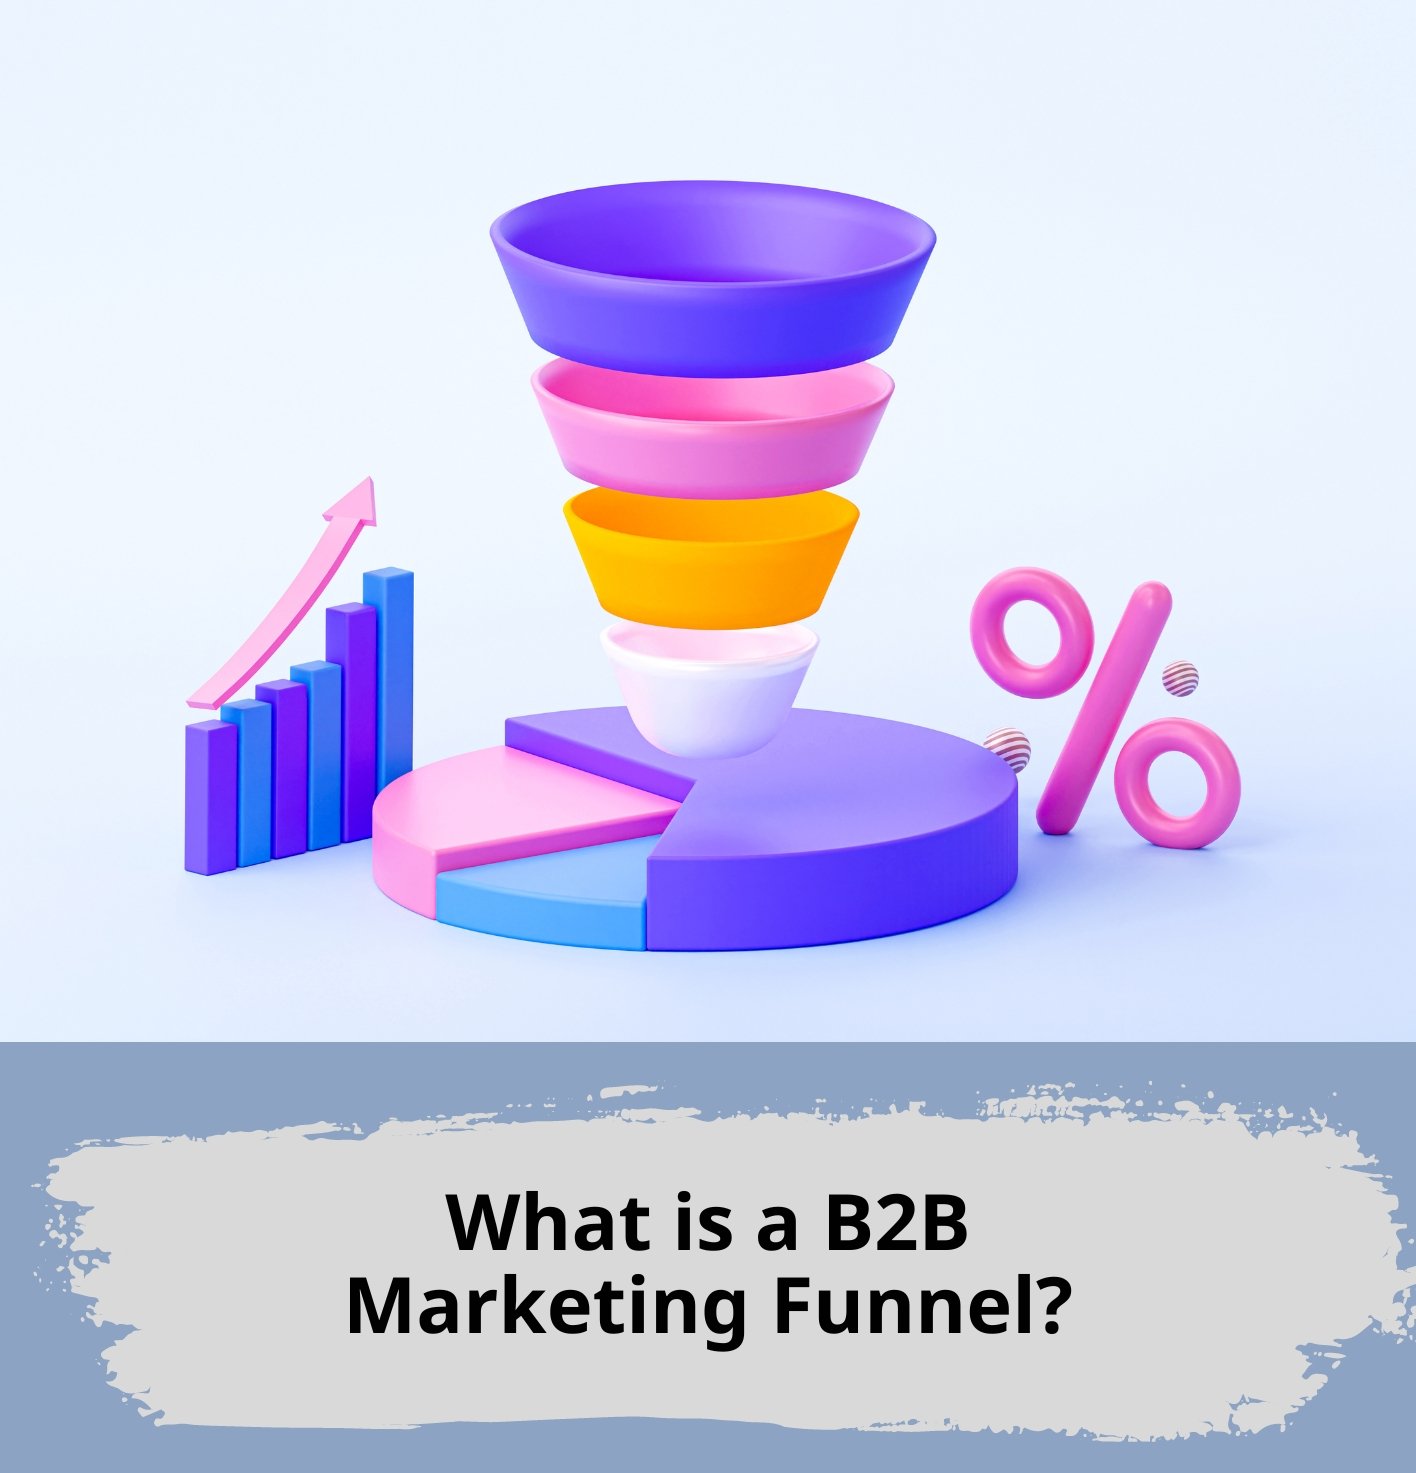 What is a B2B Marketing Funnel?